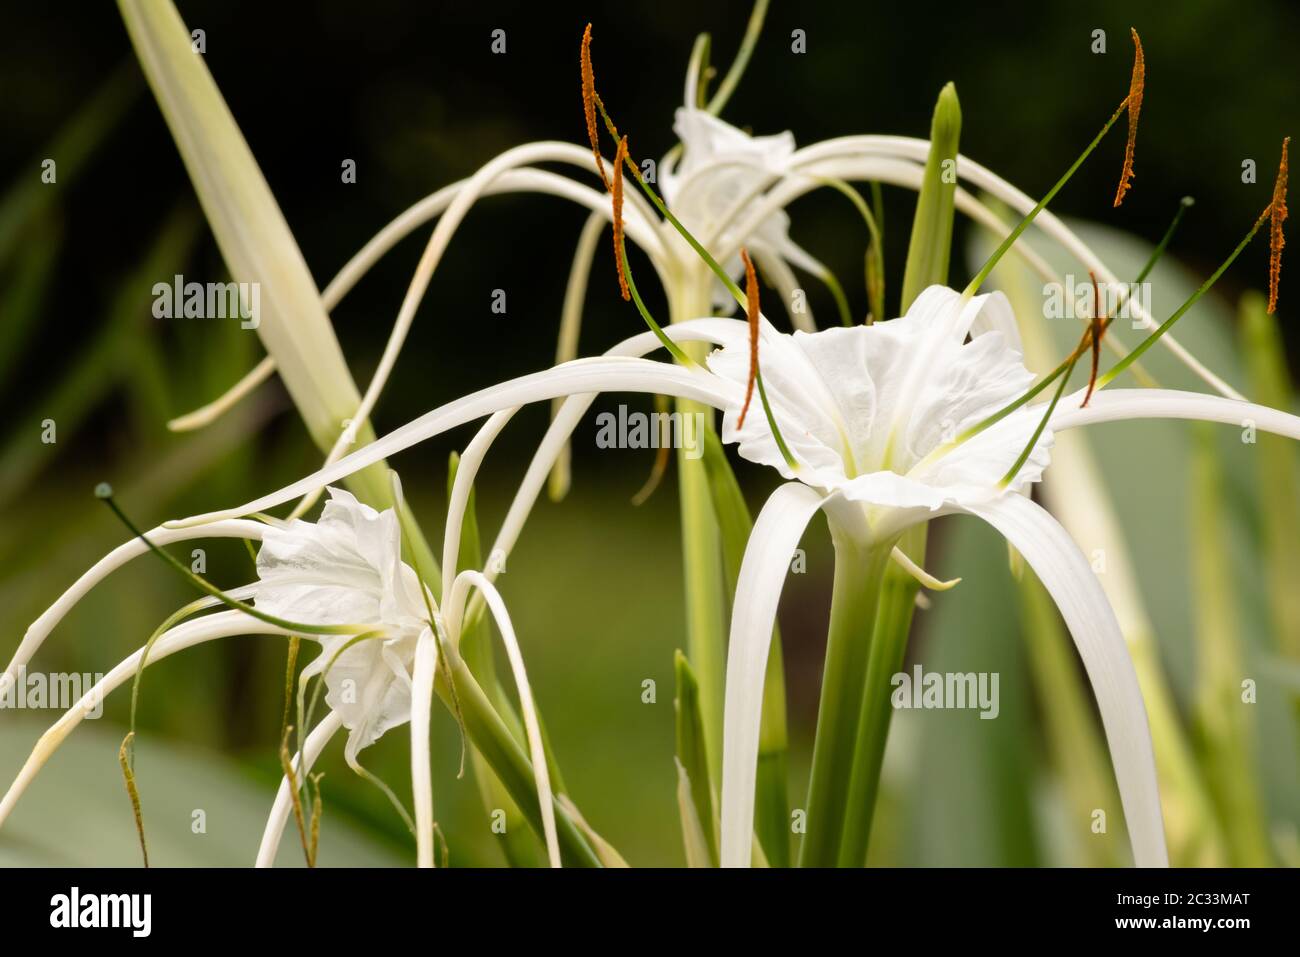 Close up of the light, delicate, gossamer flowers of the white spider lily plant in different stages of maturity Stock Photo